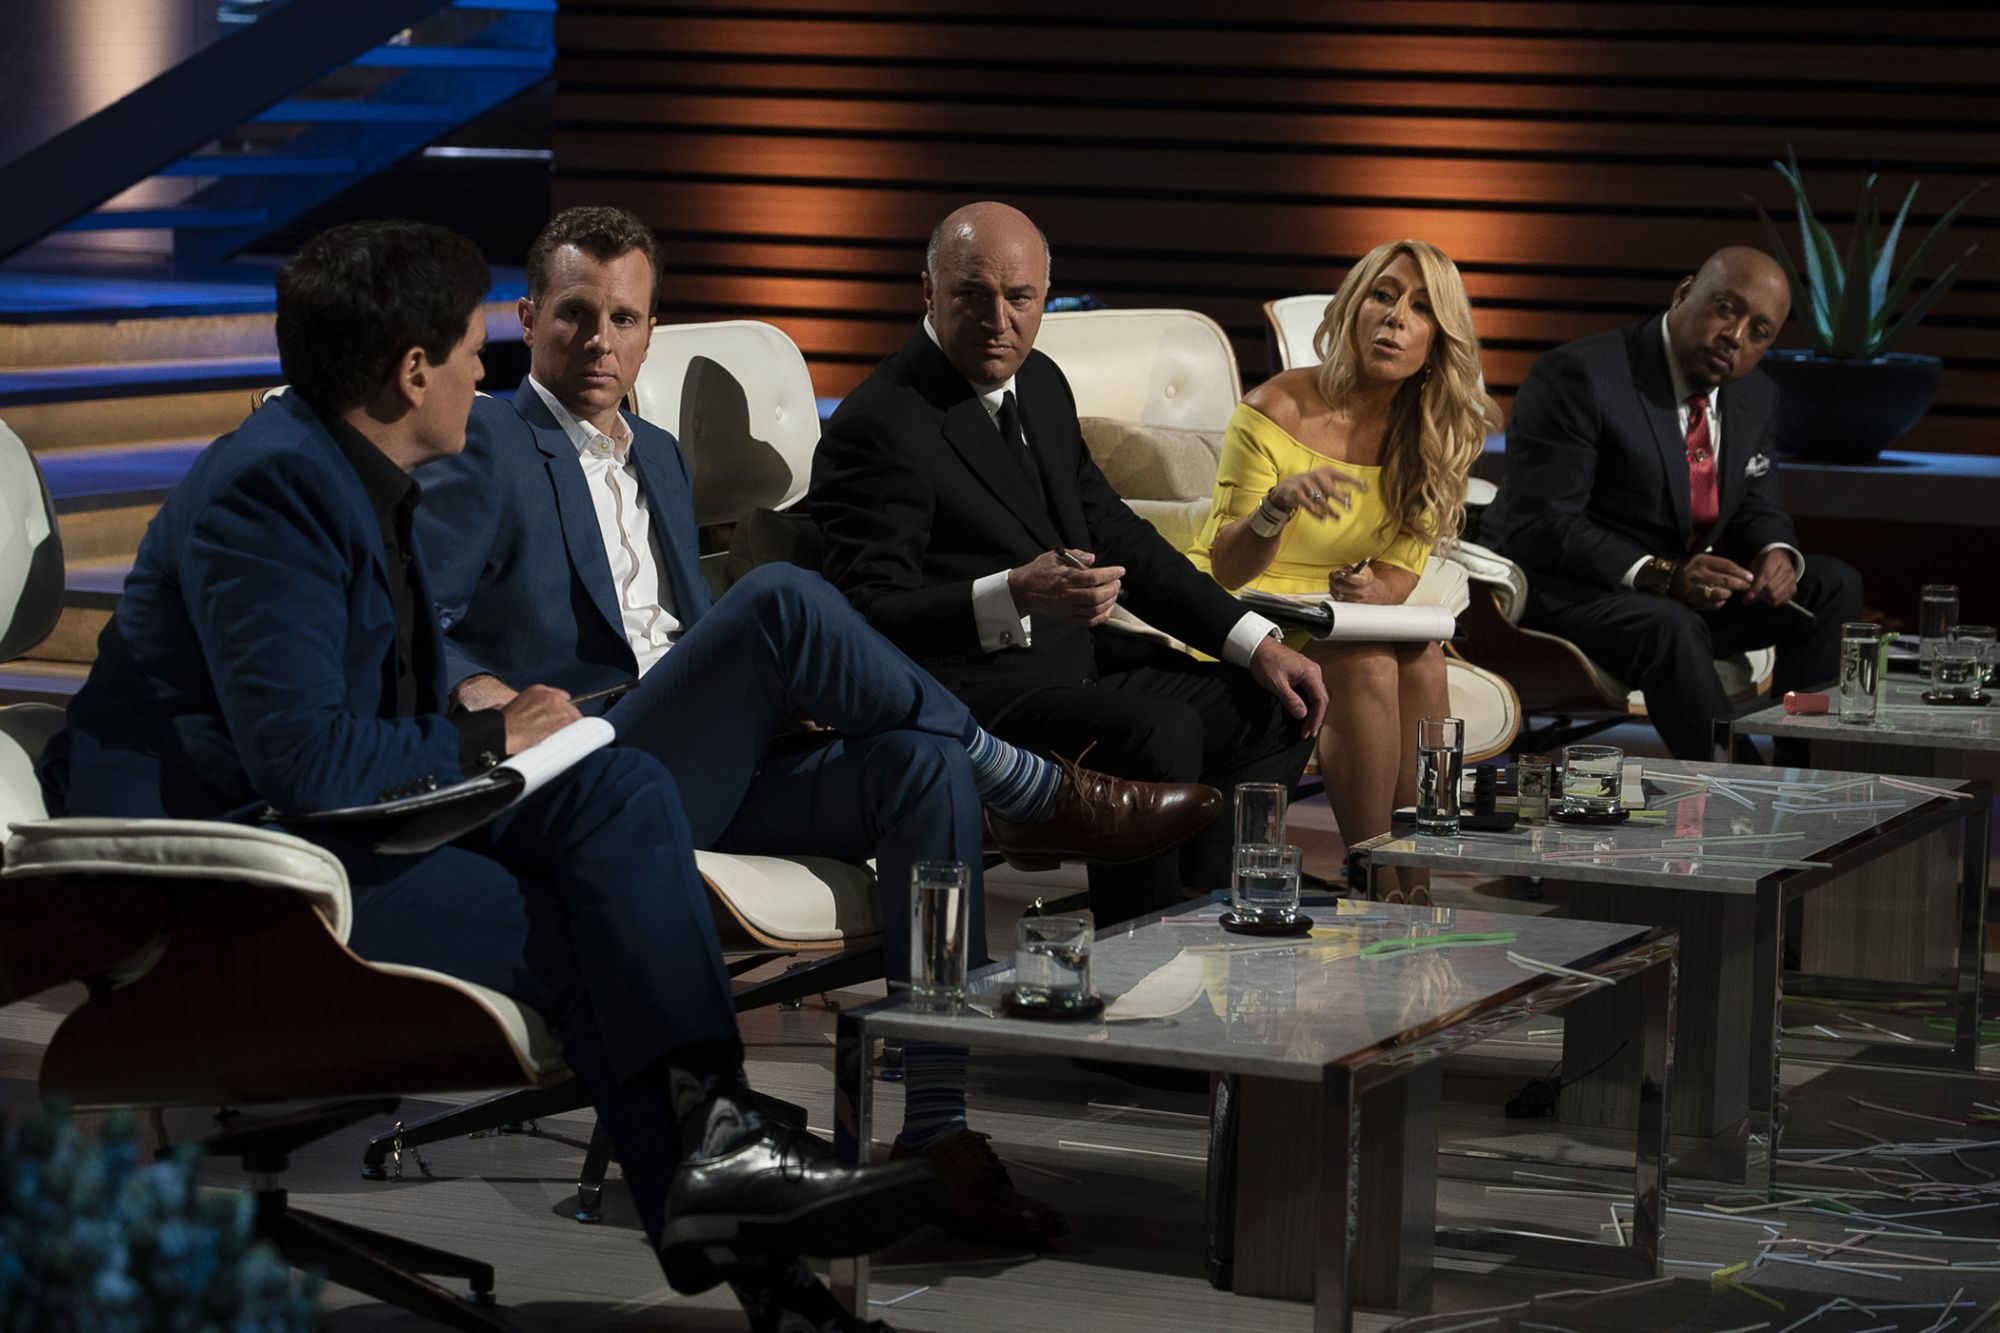 Those Deals You See Entrepreneurs Celebrating on 'Shark Tank' Don't Always Come to Pass